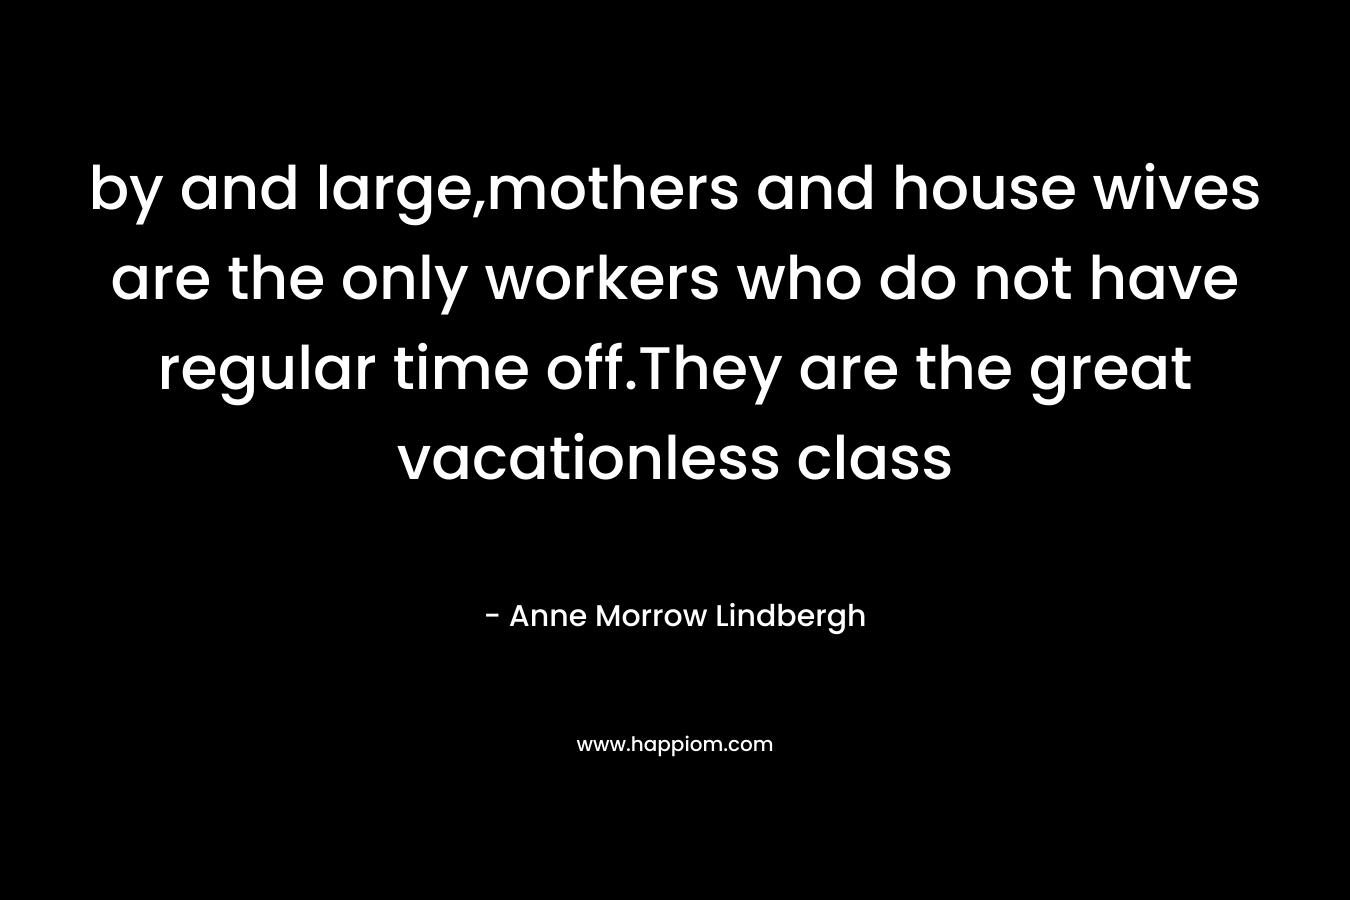 by and large,mothers and house wives are the only workers who do not have regular time off.They are the great vacationless class